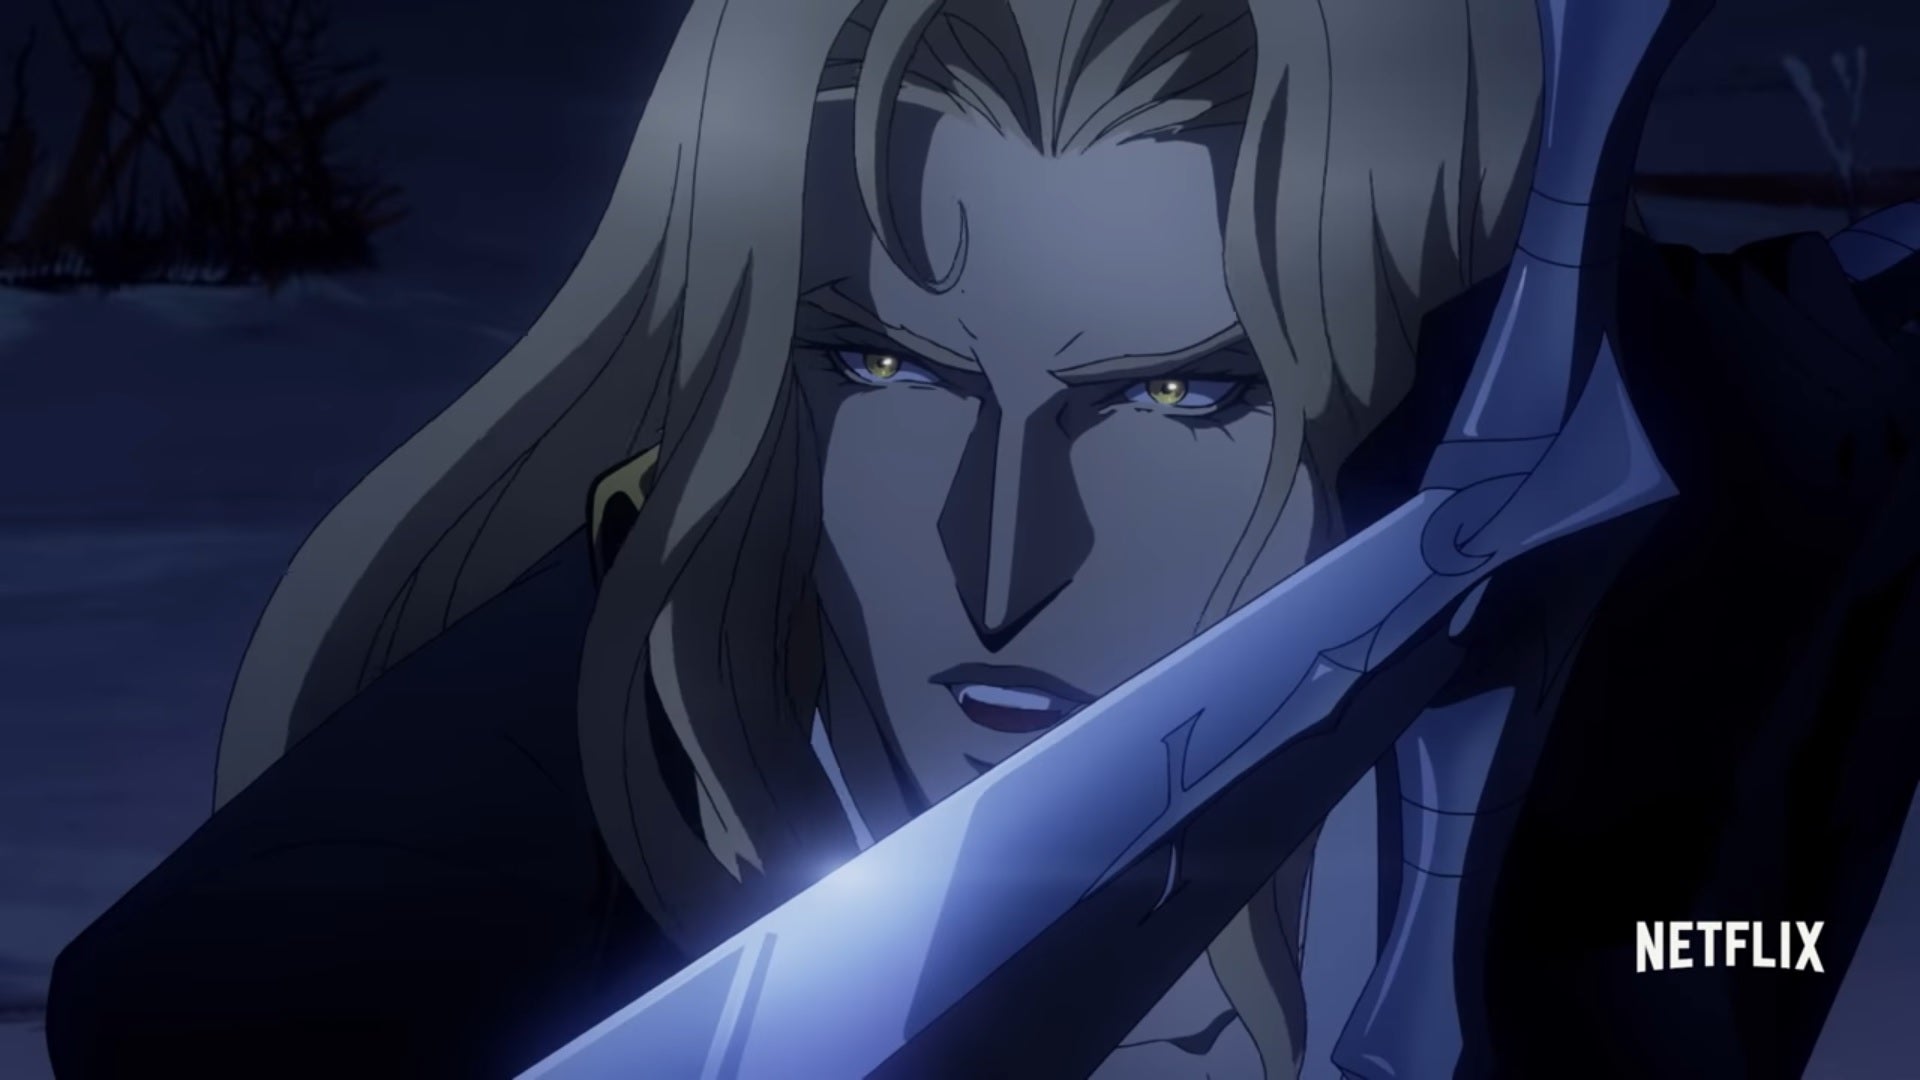 Castlevania season 2 trailer shows off bloody monster-fighting action |  VG247